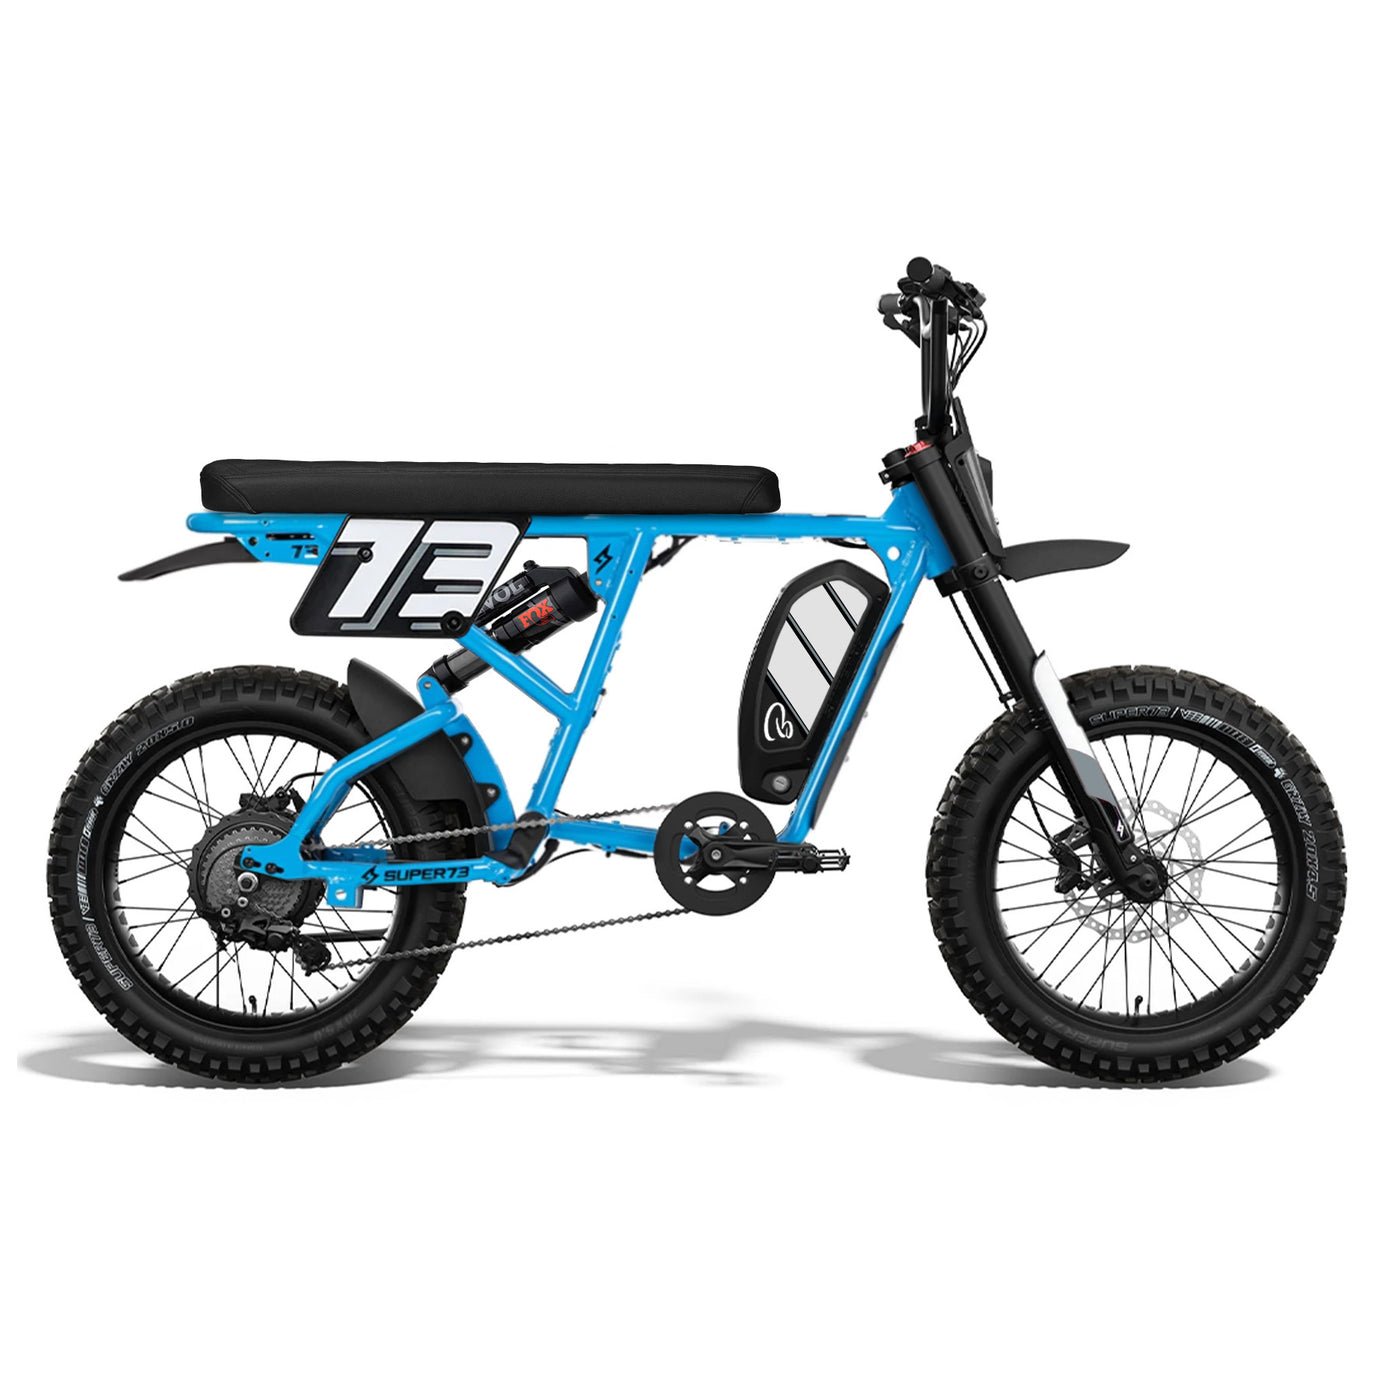 Blue BSD Special Edition Super73 with black seat.